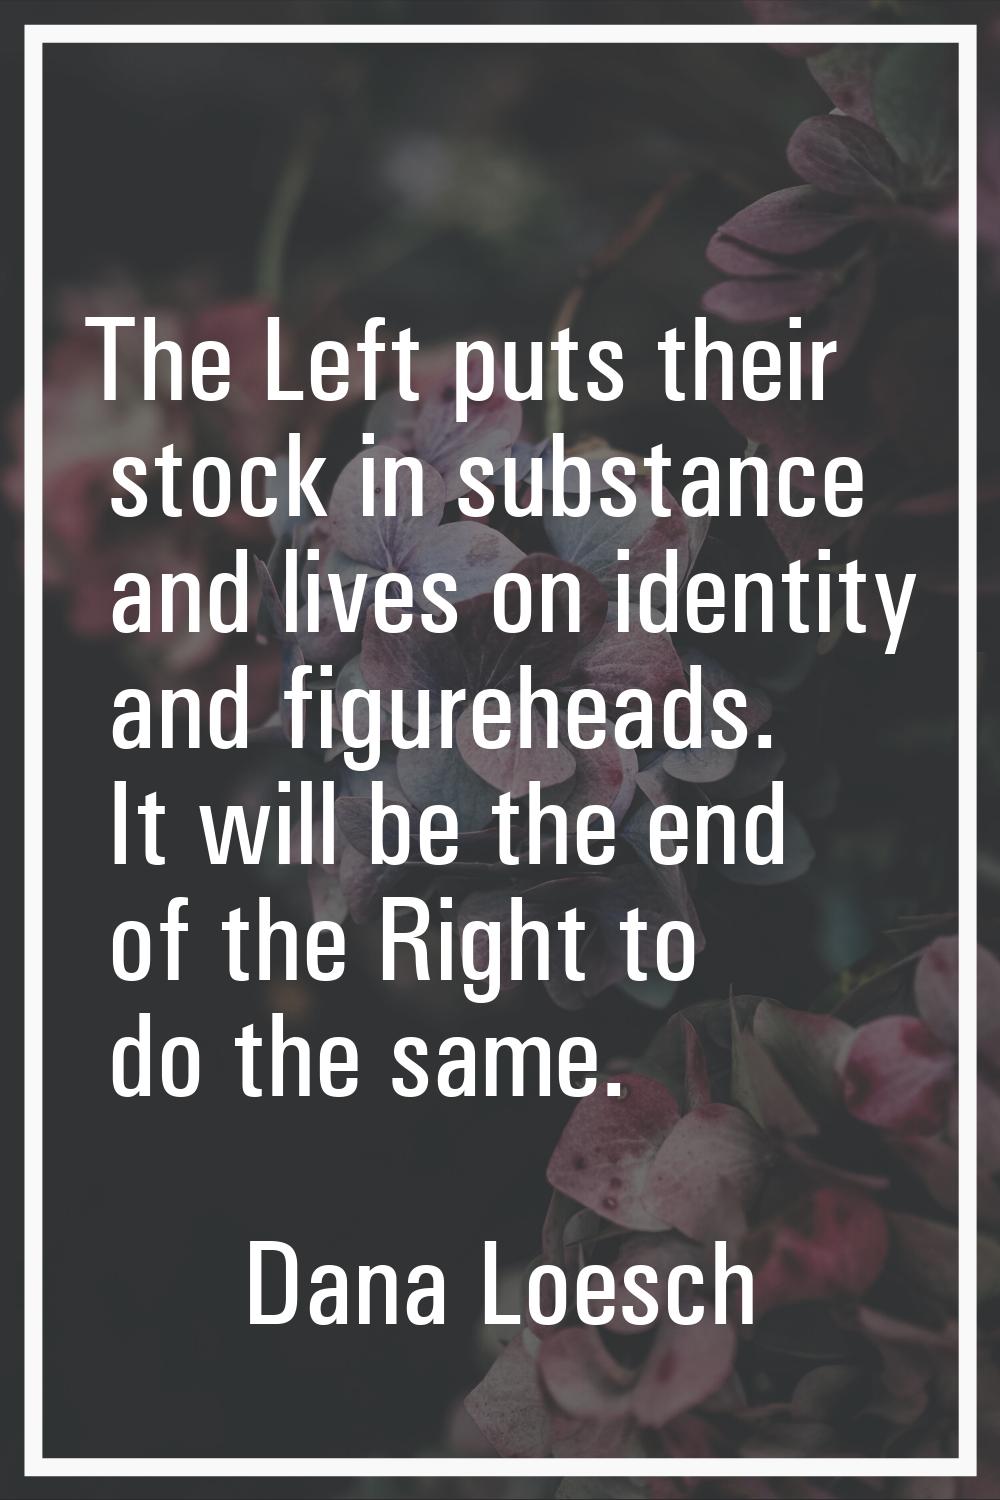 The Left puts their stock in substance and lives on identity and figureheads. It will be the end of